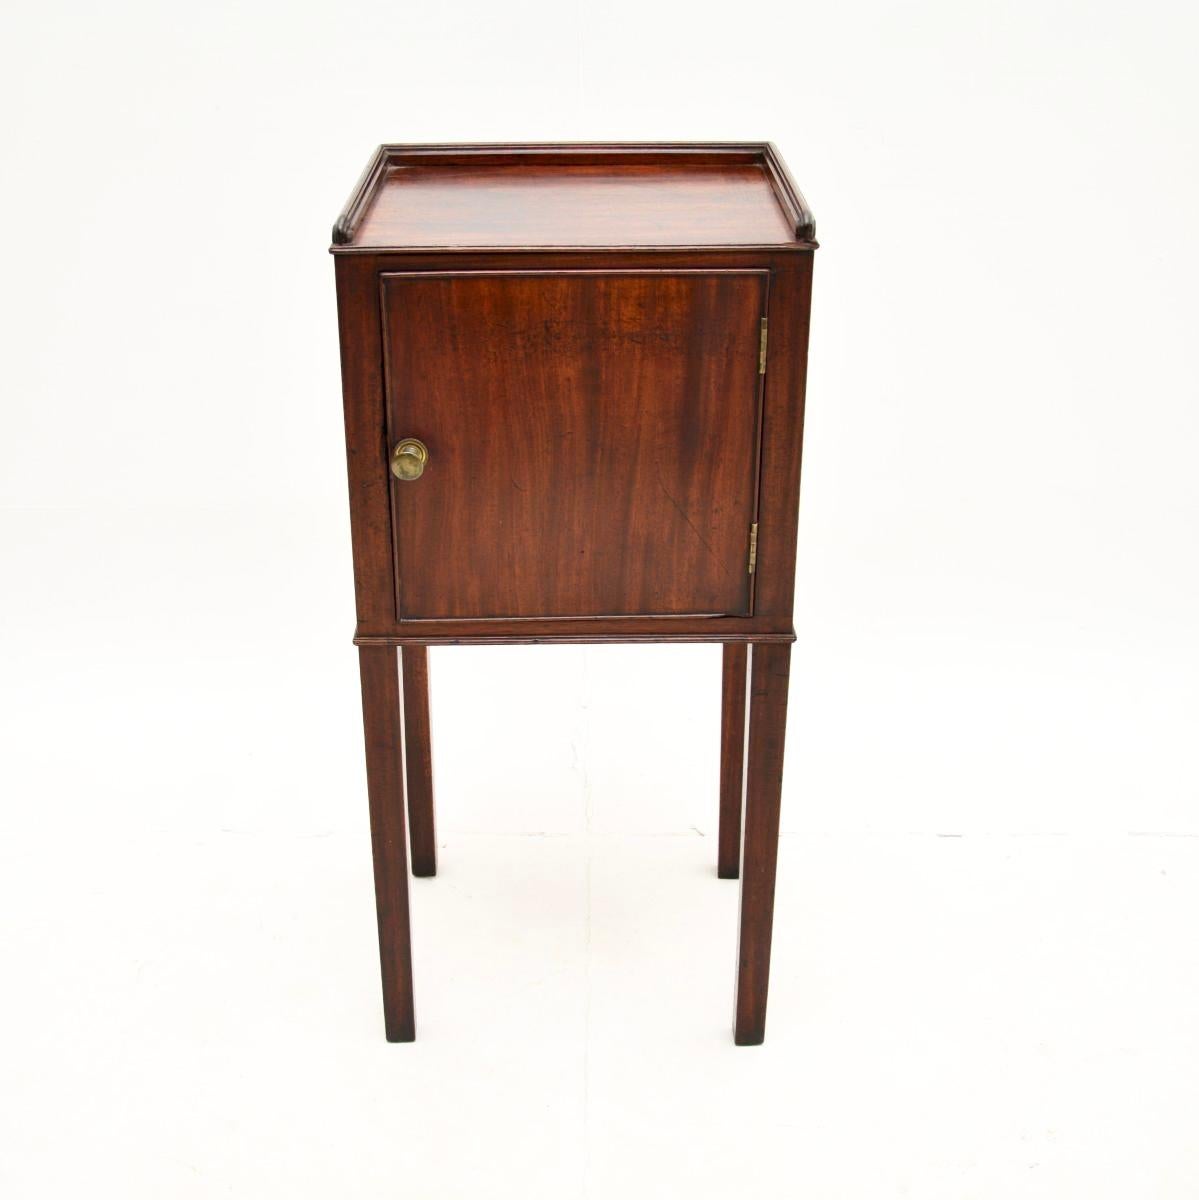 A smart and very well made antique Georgian period cabinet on legs. This was made in England, it dates from around 1790-1810.

It is of superb quality and has a very useful design. It would be perfect as a bedside cabinet or as a side / lamp table